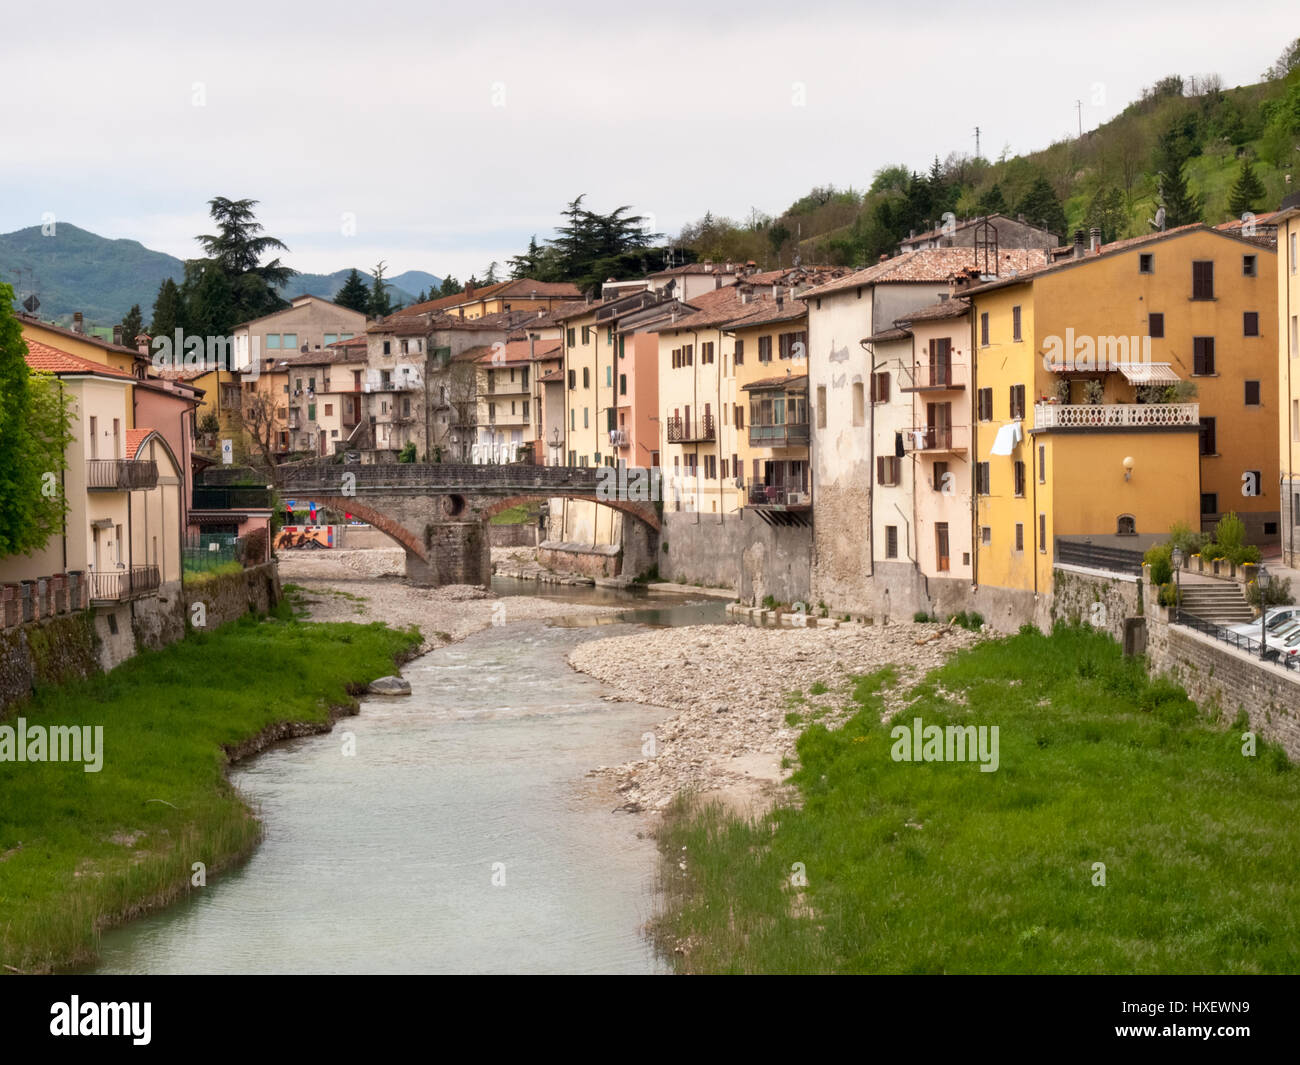 Italy, Rocca San Casciano - april 23, 2015: the banks of the river Montone and the Old Bridge in the Valley of 'Acquacheta. The old village is located Stock Photo